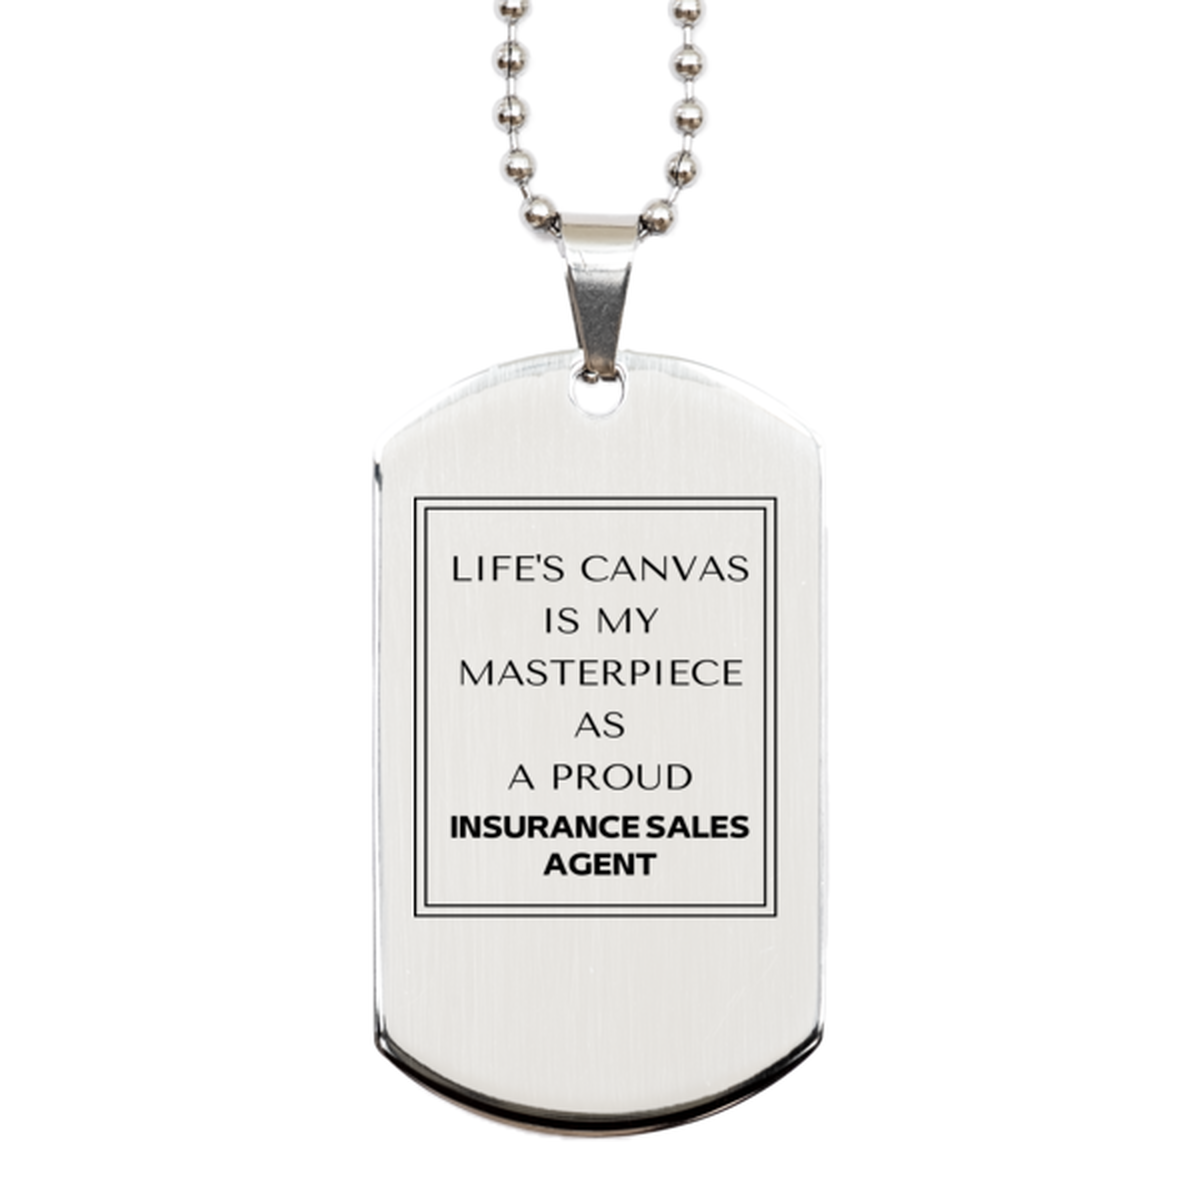 Proud Insurance Sales Agent Gifts, Life's canvas is my masterpiece, Epic Birthday Christmas Unique Silver Dog Tag For Insurance Sales Agent, Coworkers, Men, Women, Friends